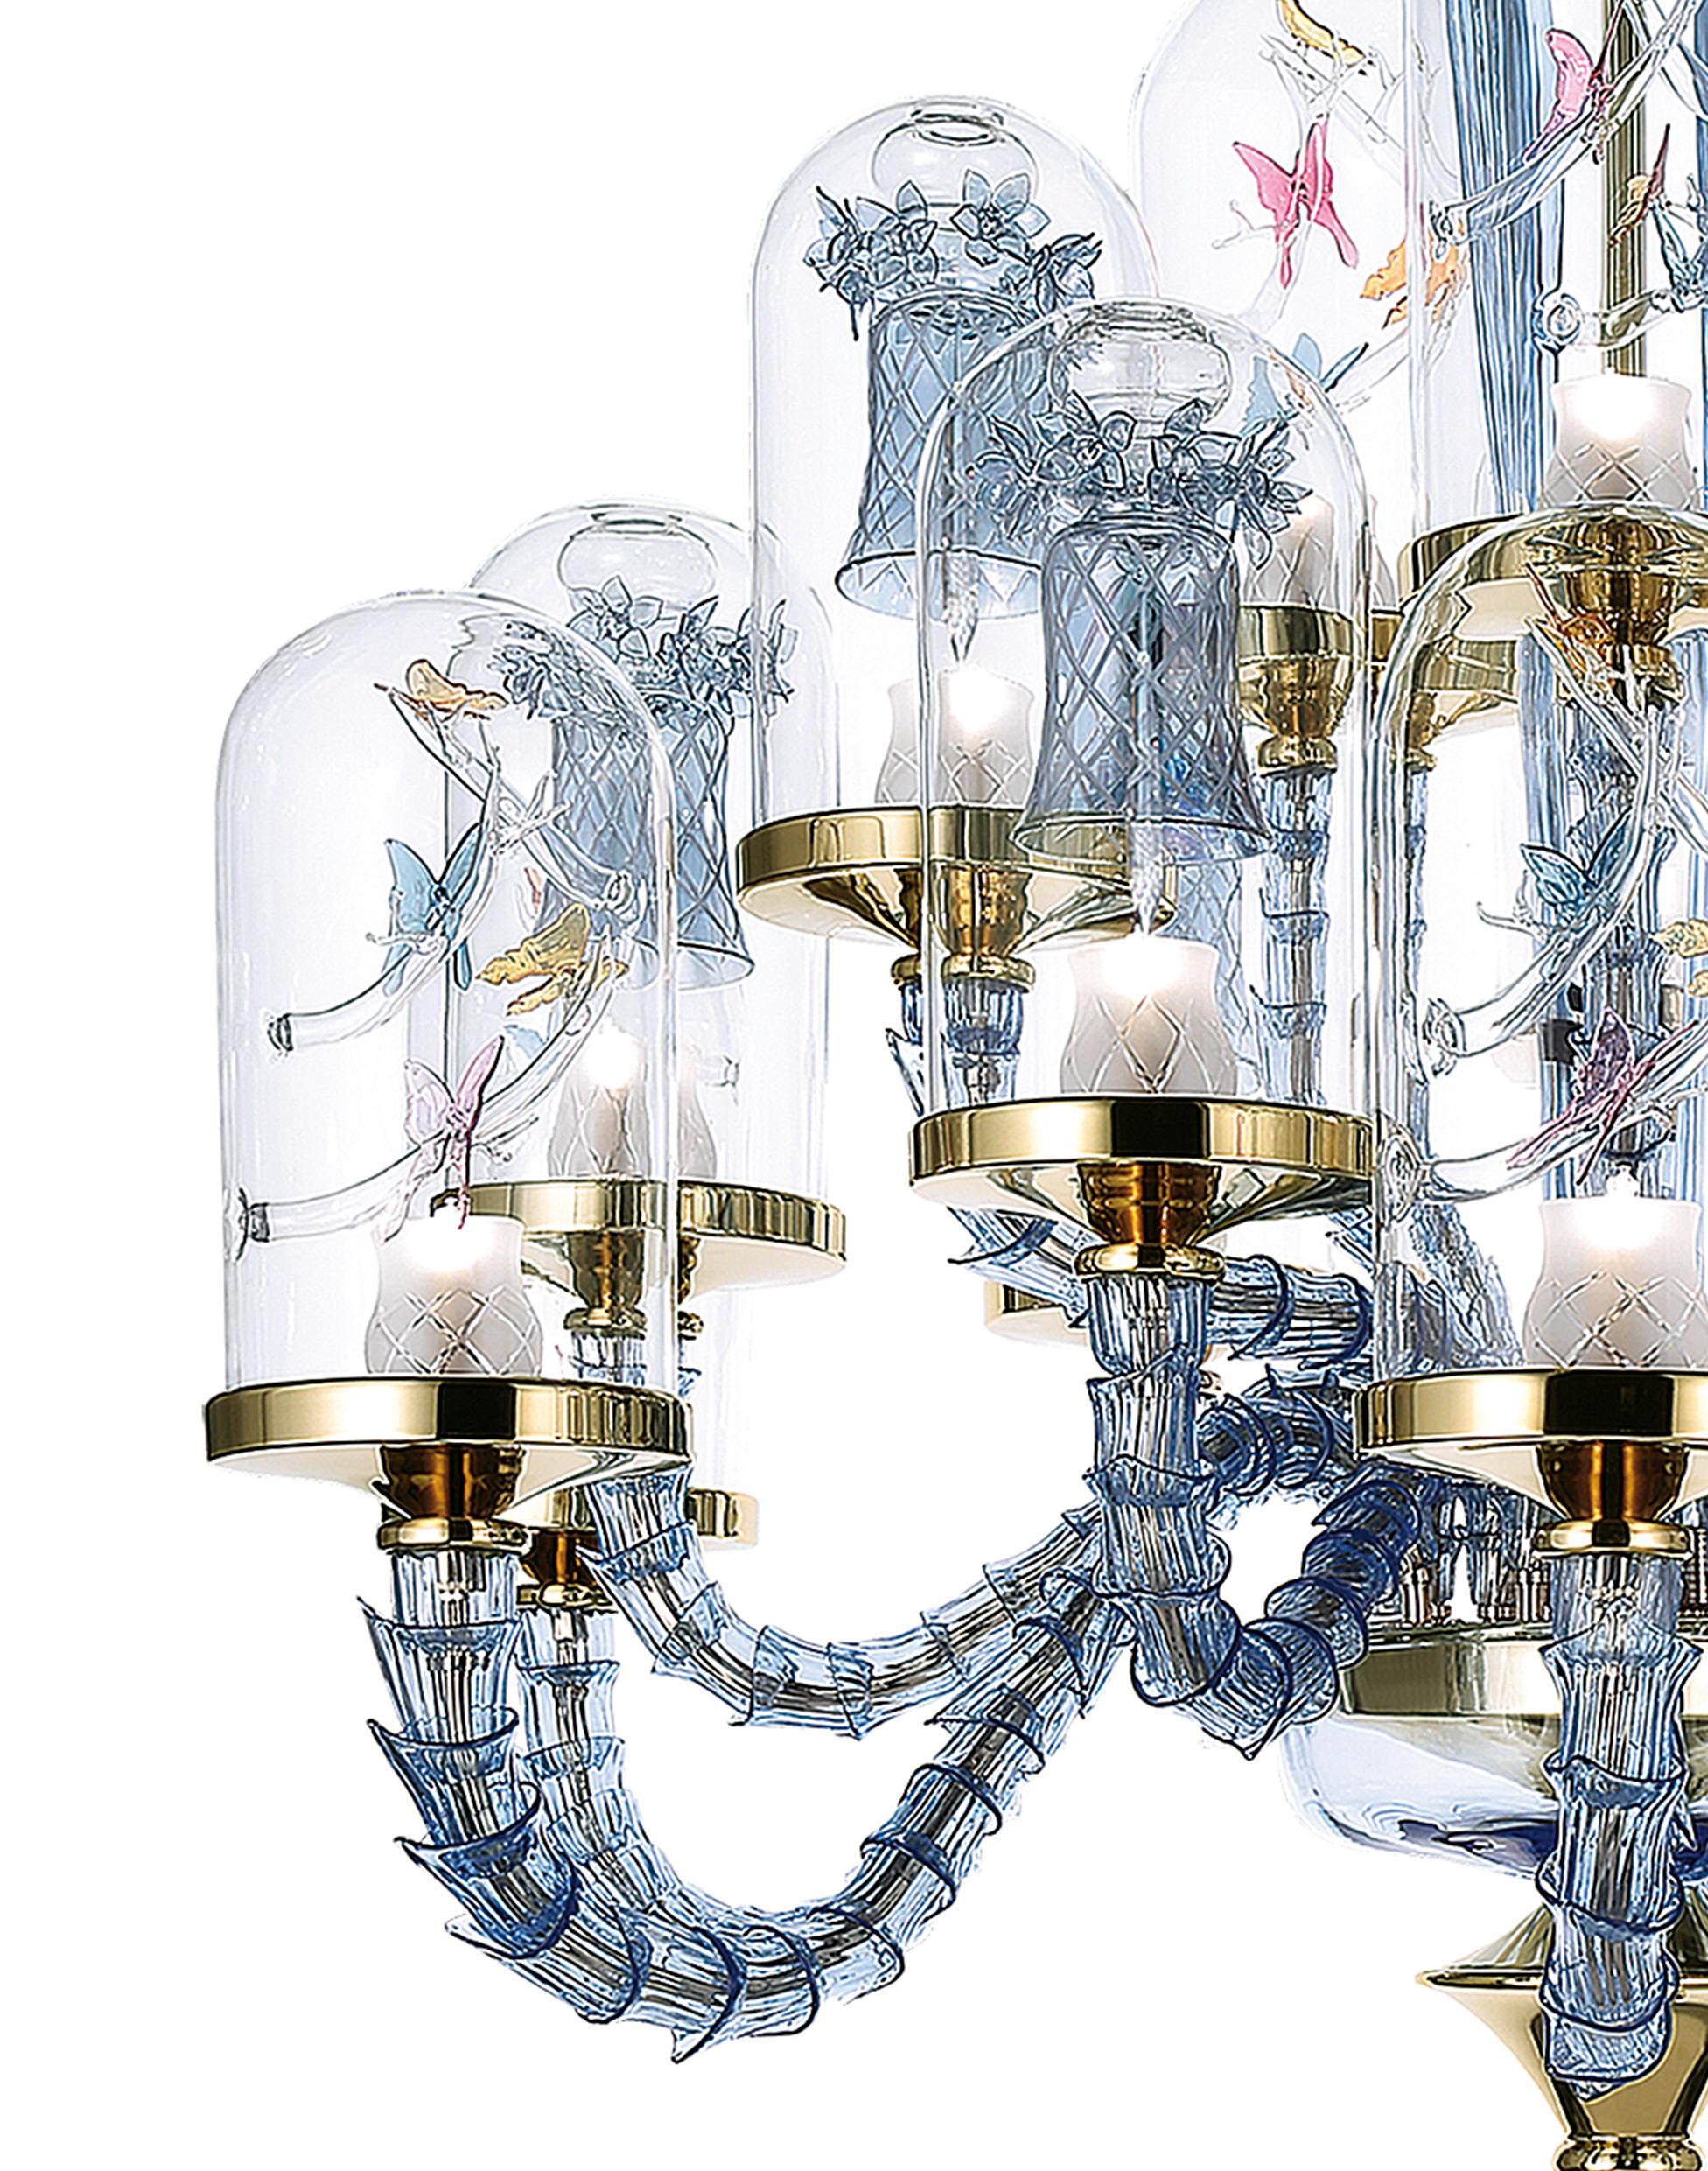 The Jardin de Verre collection by Alessandro La Spada, a love story between man and nature, the tale of a nineteenth century English Doctor, Nathaniel B. Ward, who was passionate about botany.


The chandelier, as well as the wall lamps, bases